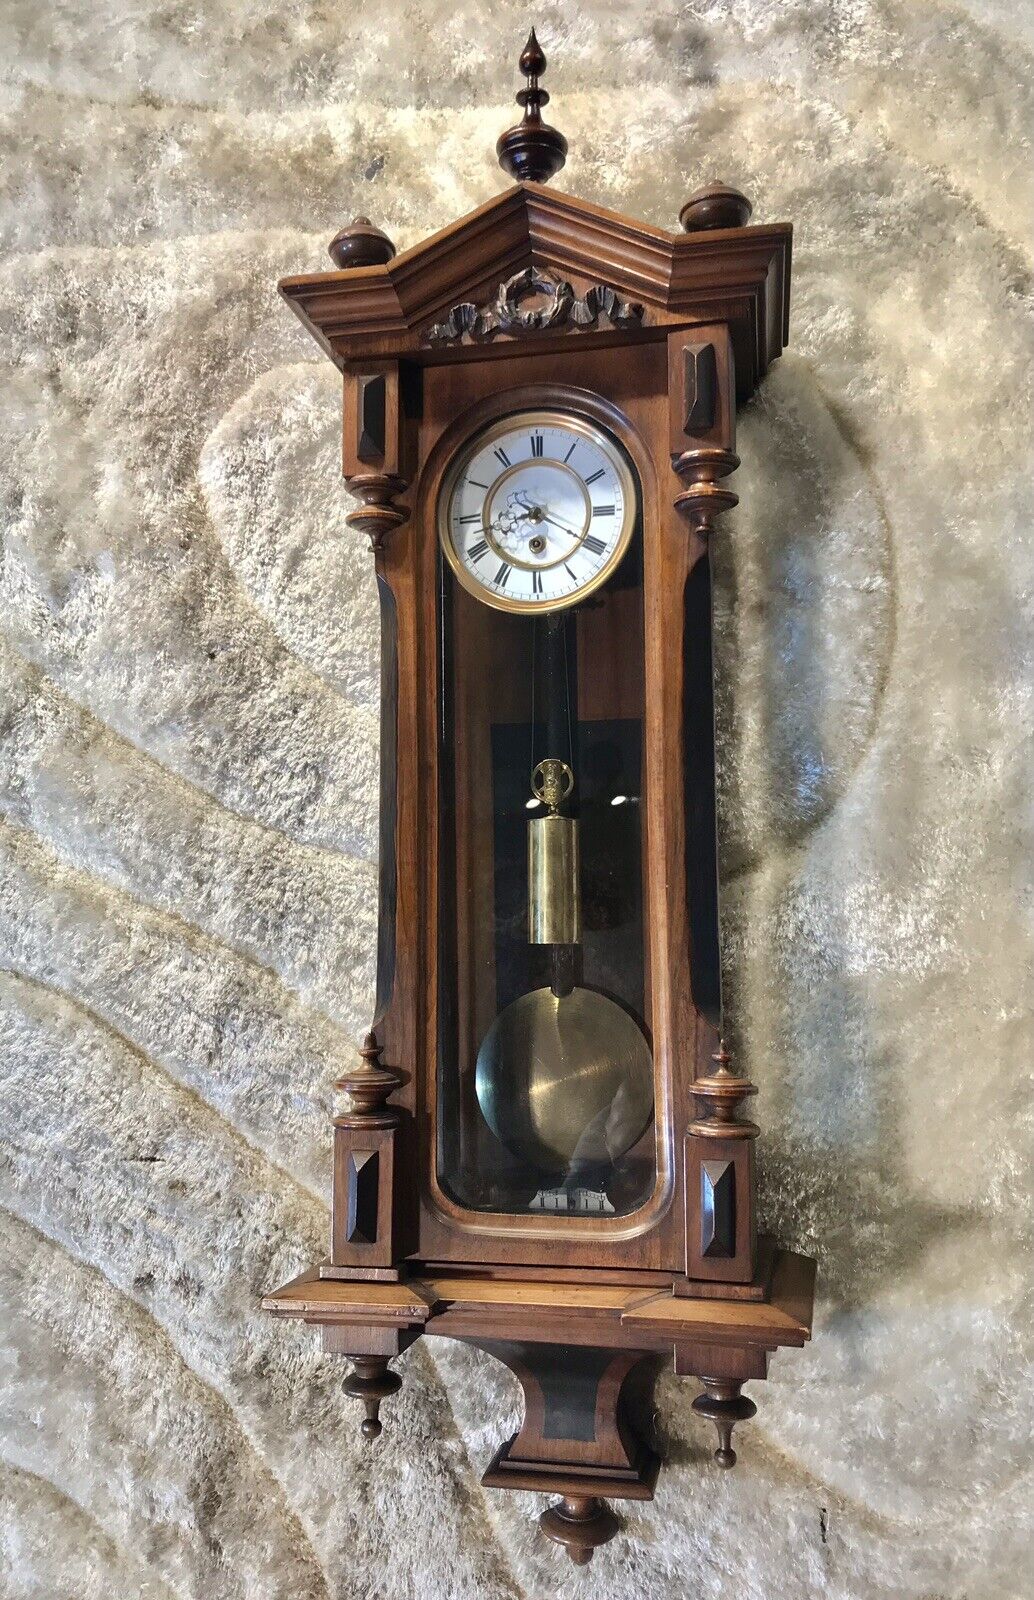 RARE SMALL SIZE Antique Germany Vienna,Clock,1 Brass Weights Driven,walnut Case,